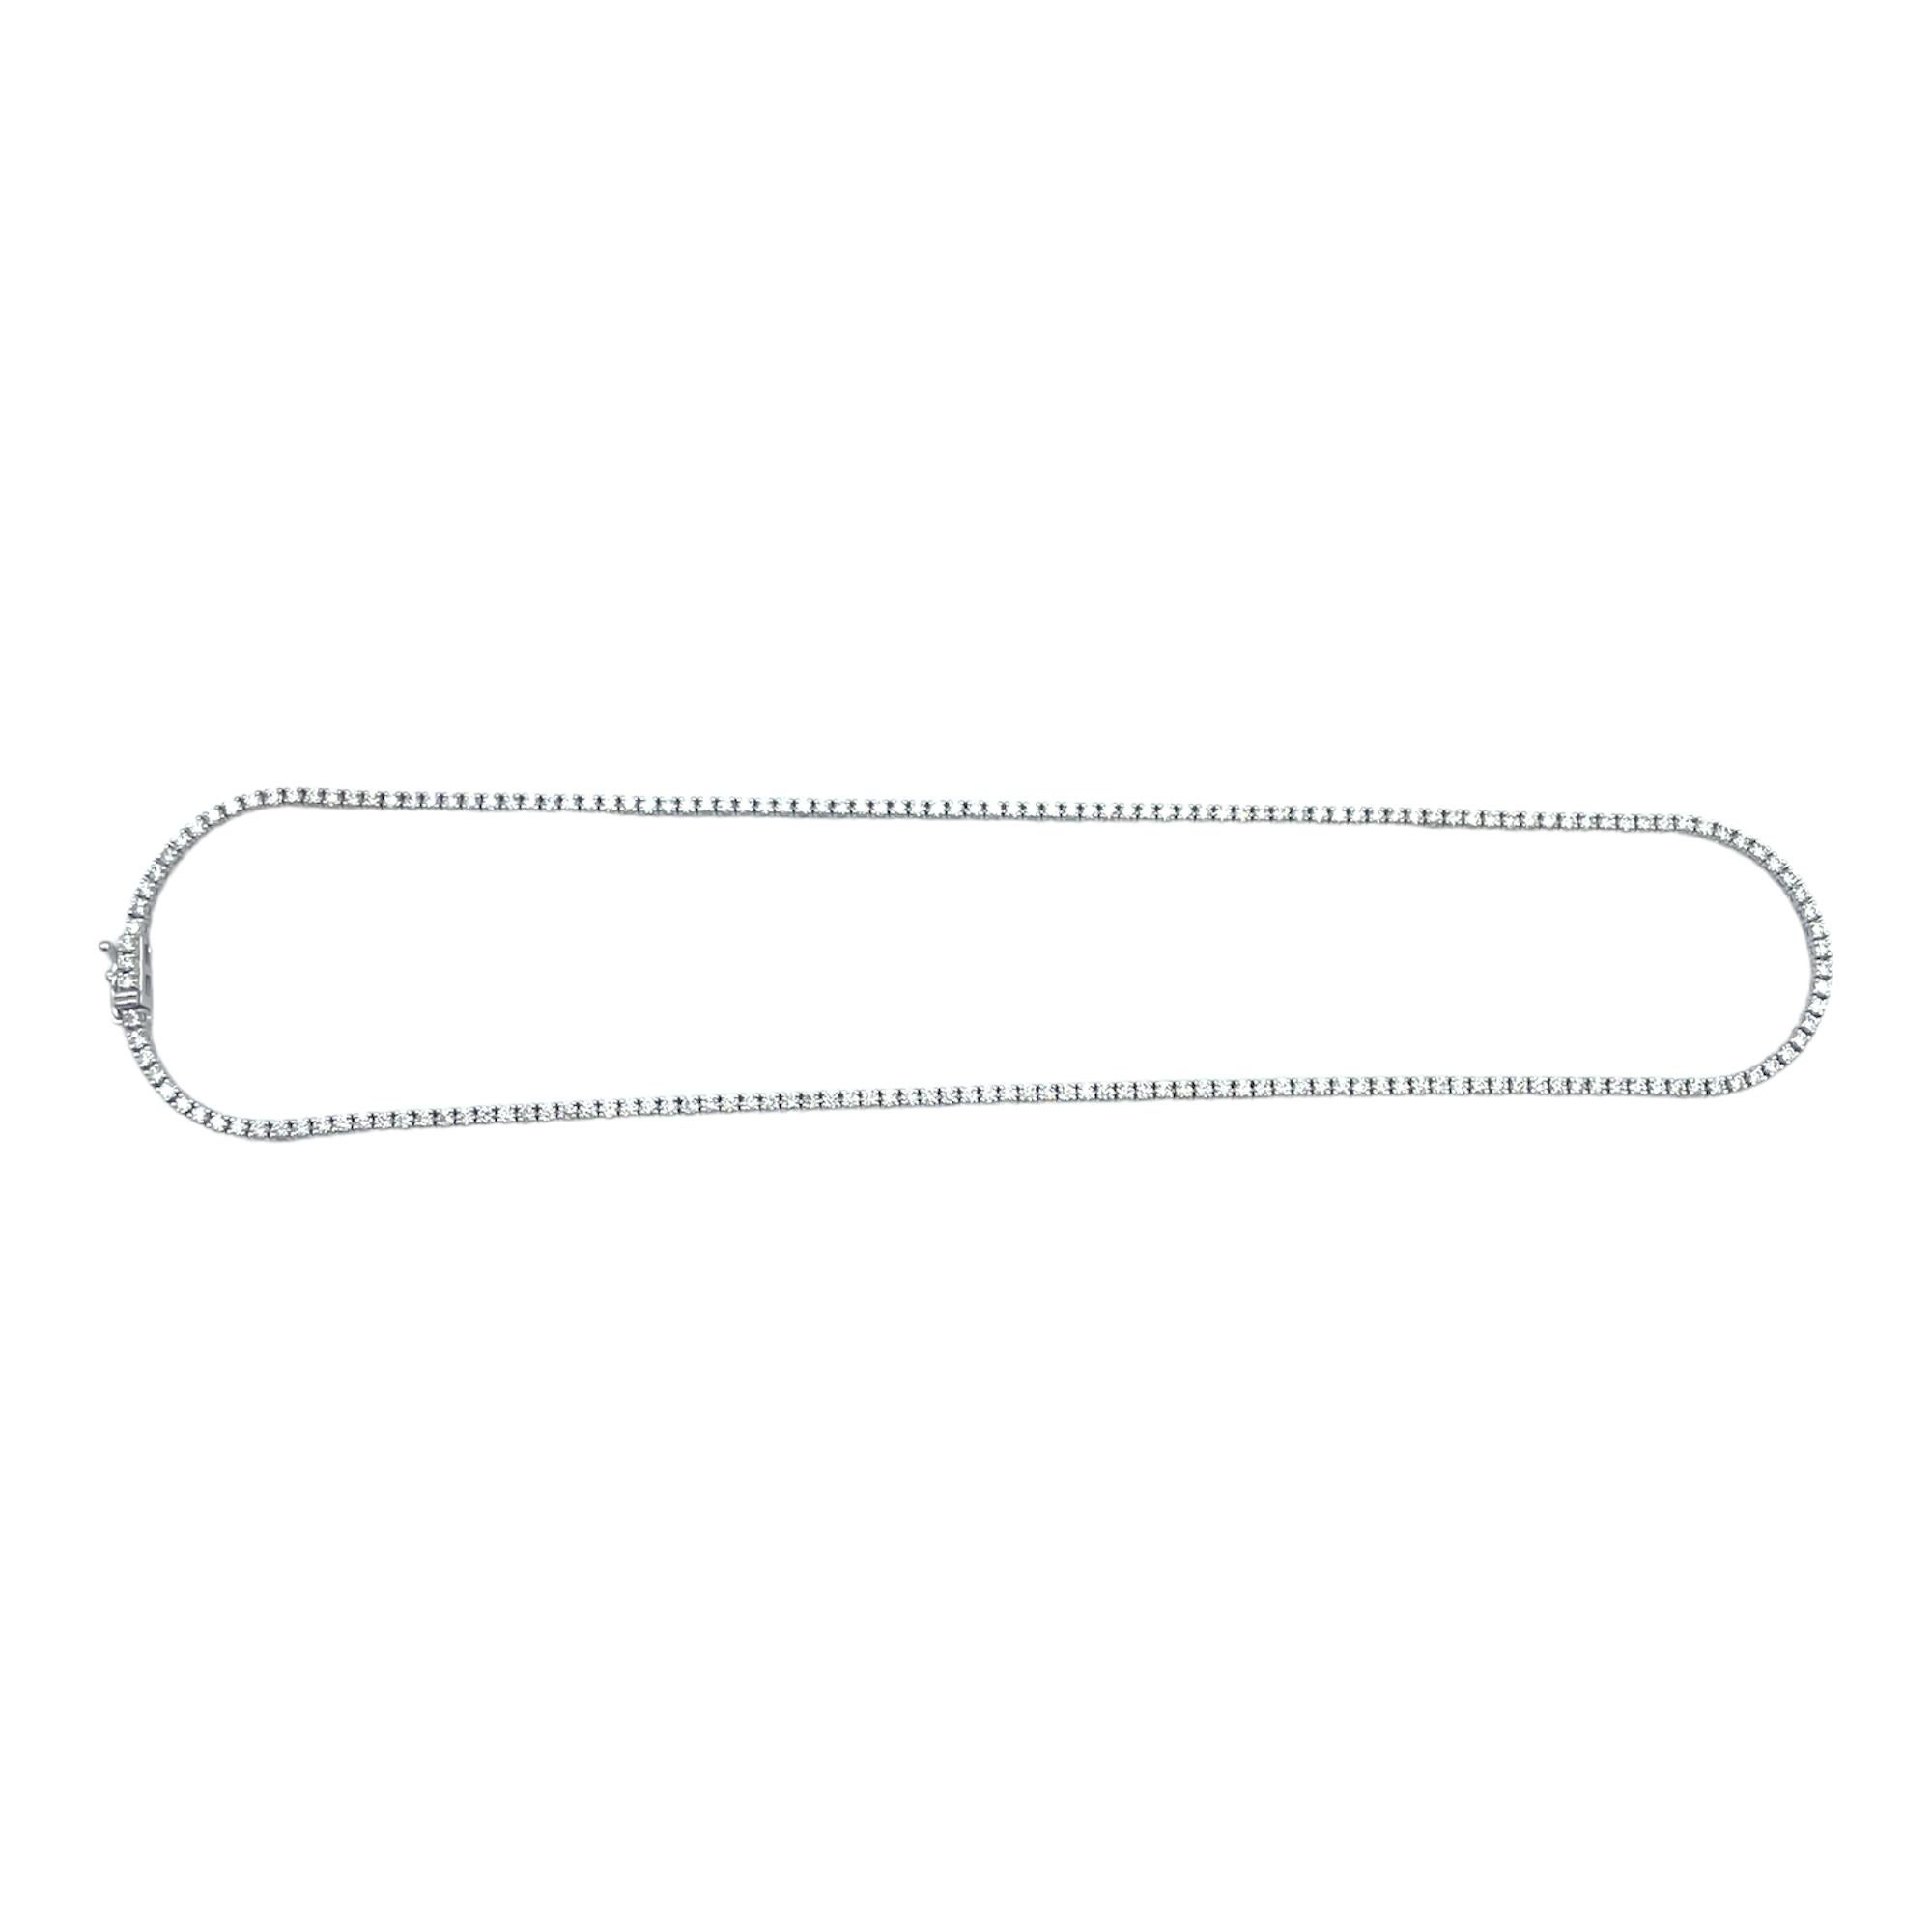 4.75 Carat Diamond Tennis Necklace with Round Diamonds in White Gold Chain For Sale 2